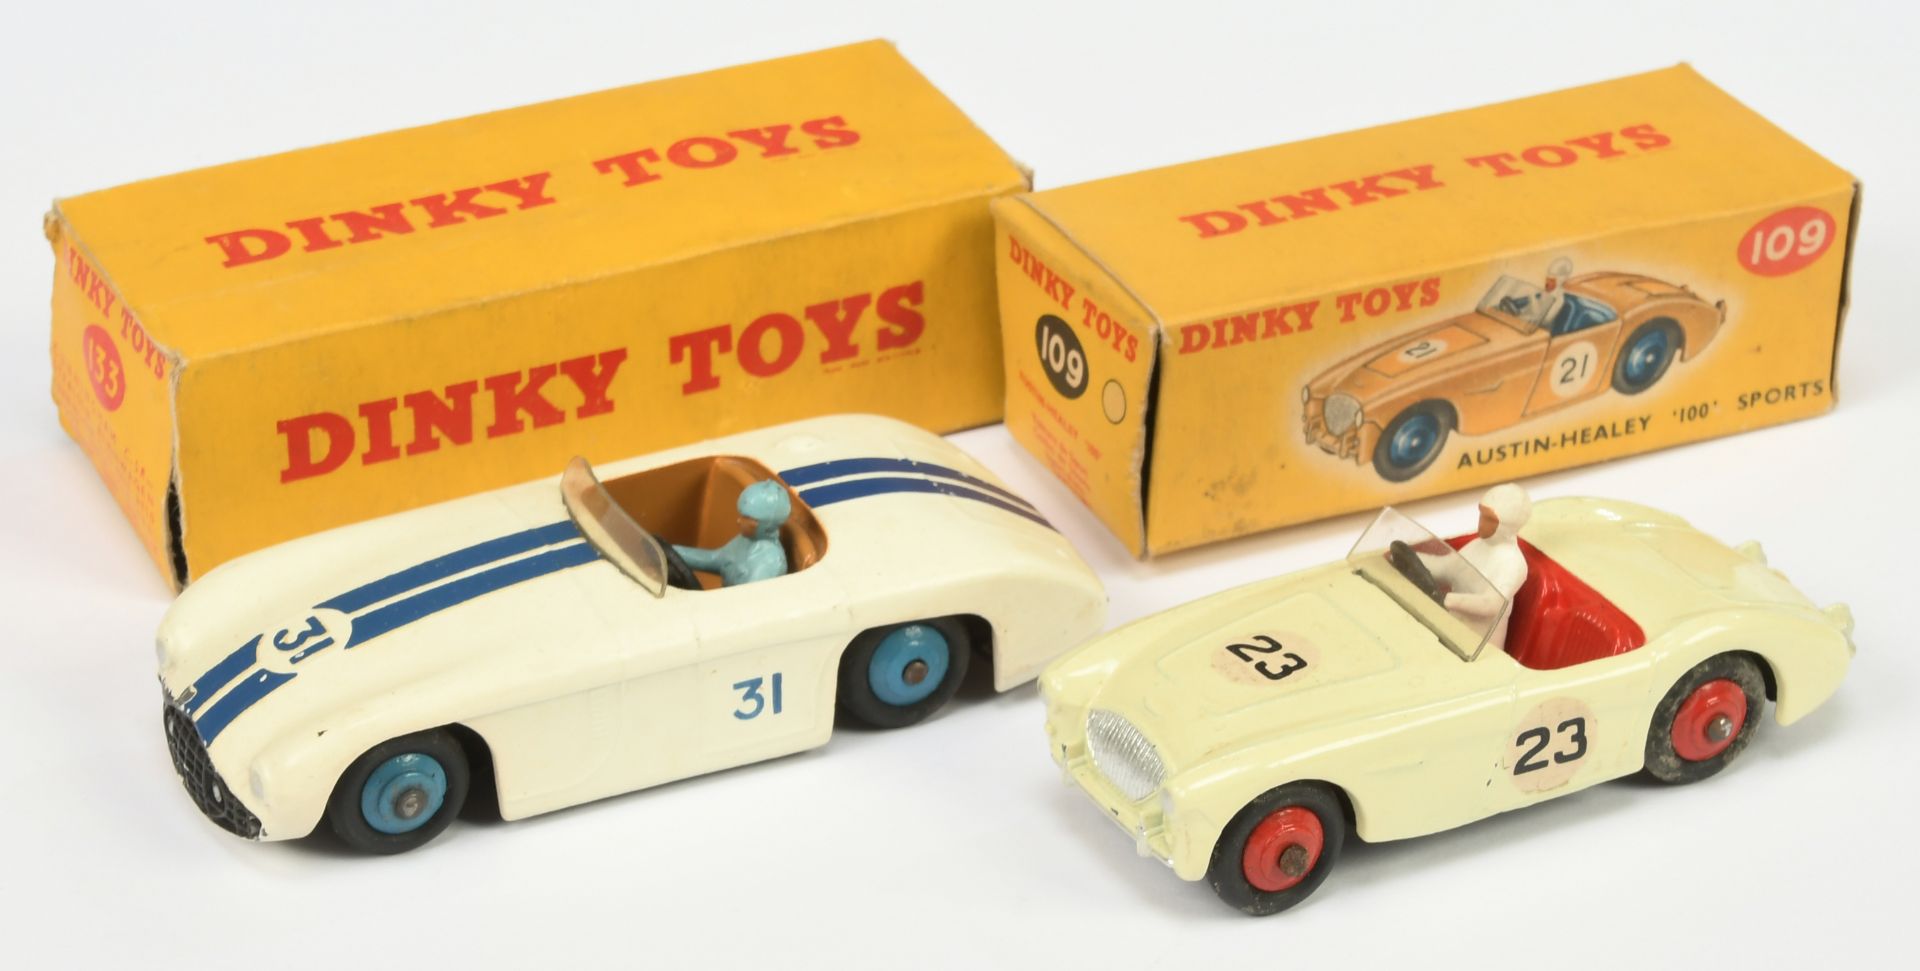 Dinky Toys A Pair Of racing Cars - (1) 108 Austin Healey - Cream, red seats and hubs, silver trim...